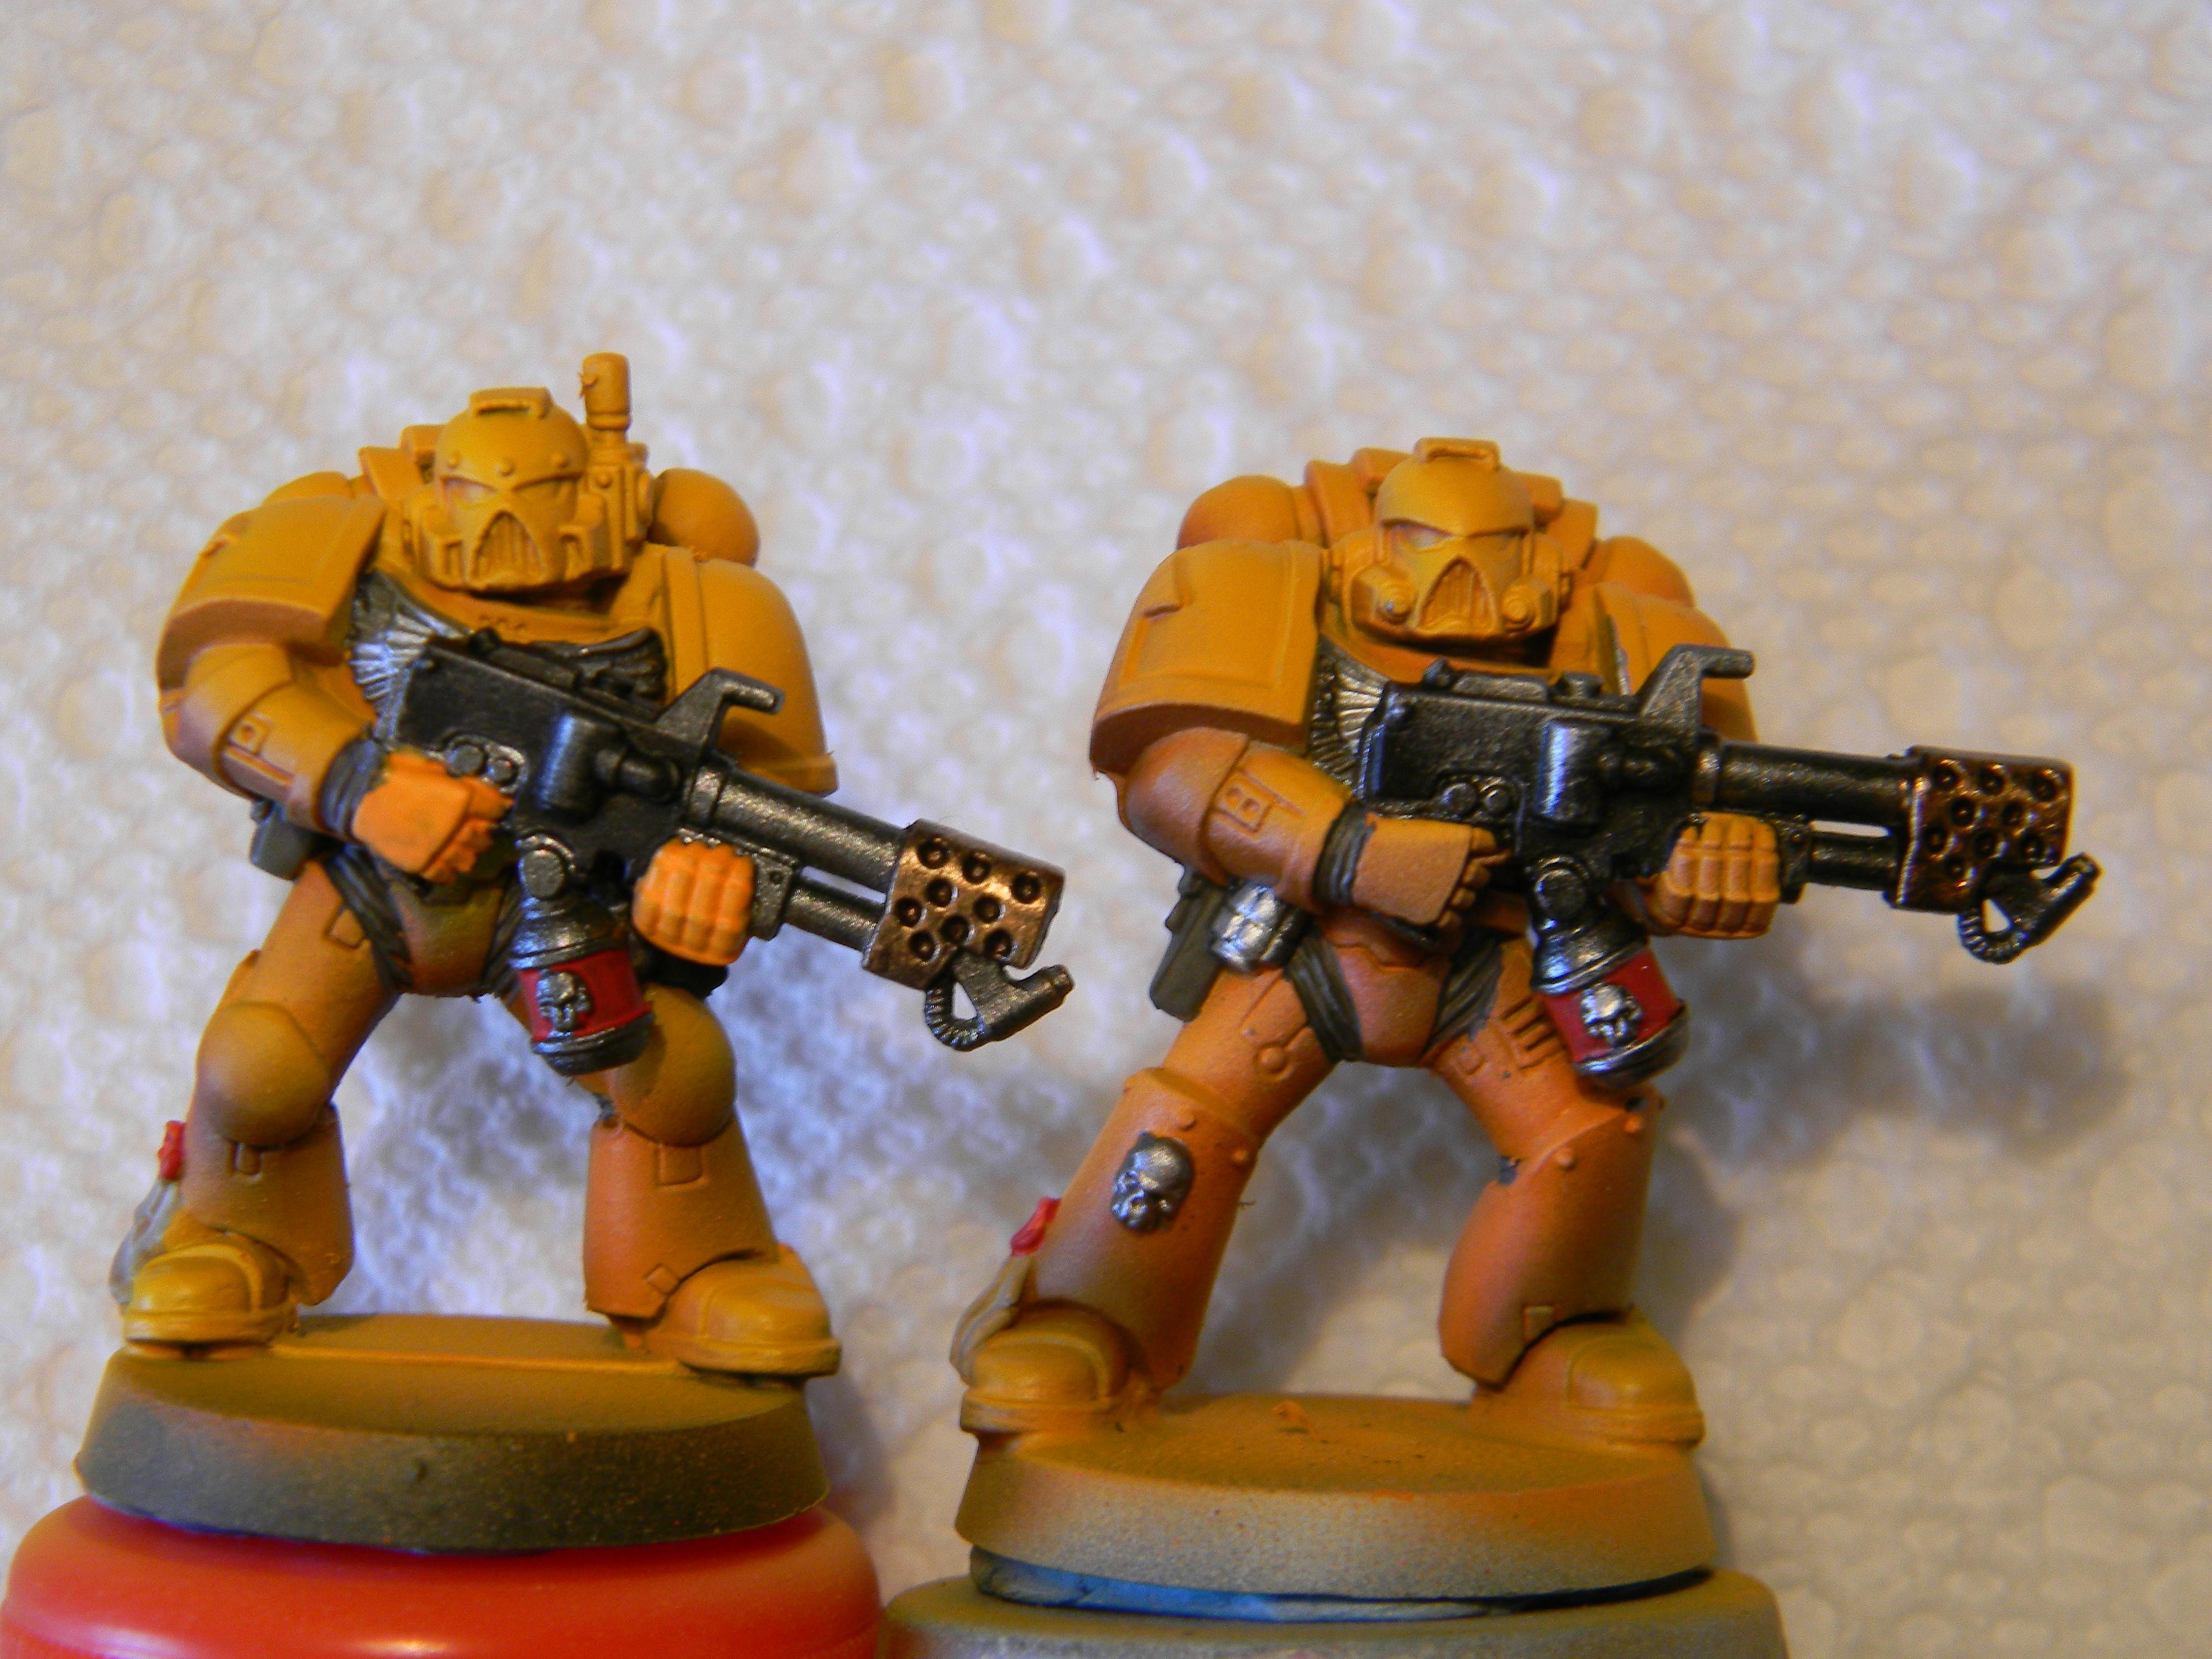 Left model was painted with flamer off the right one painted as one piece